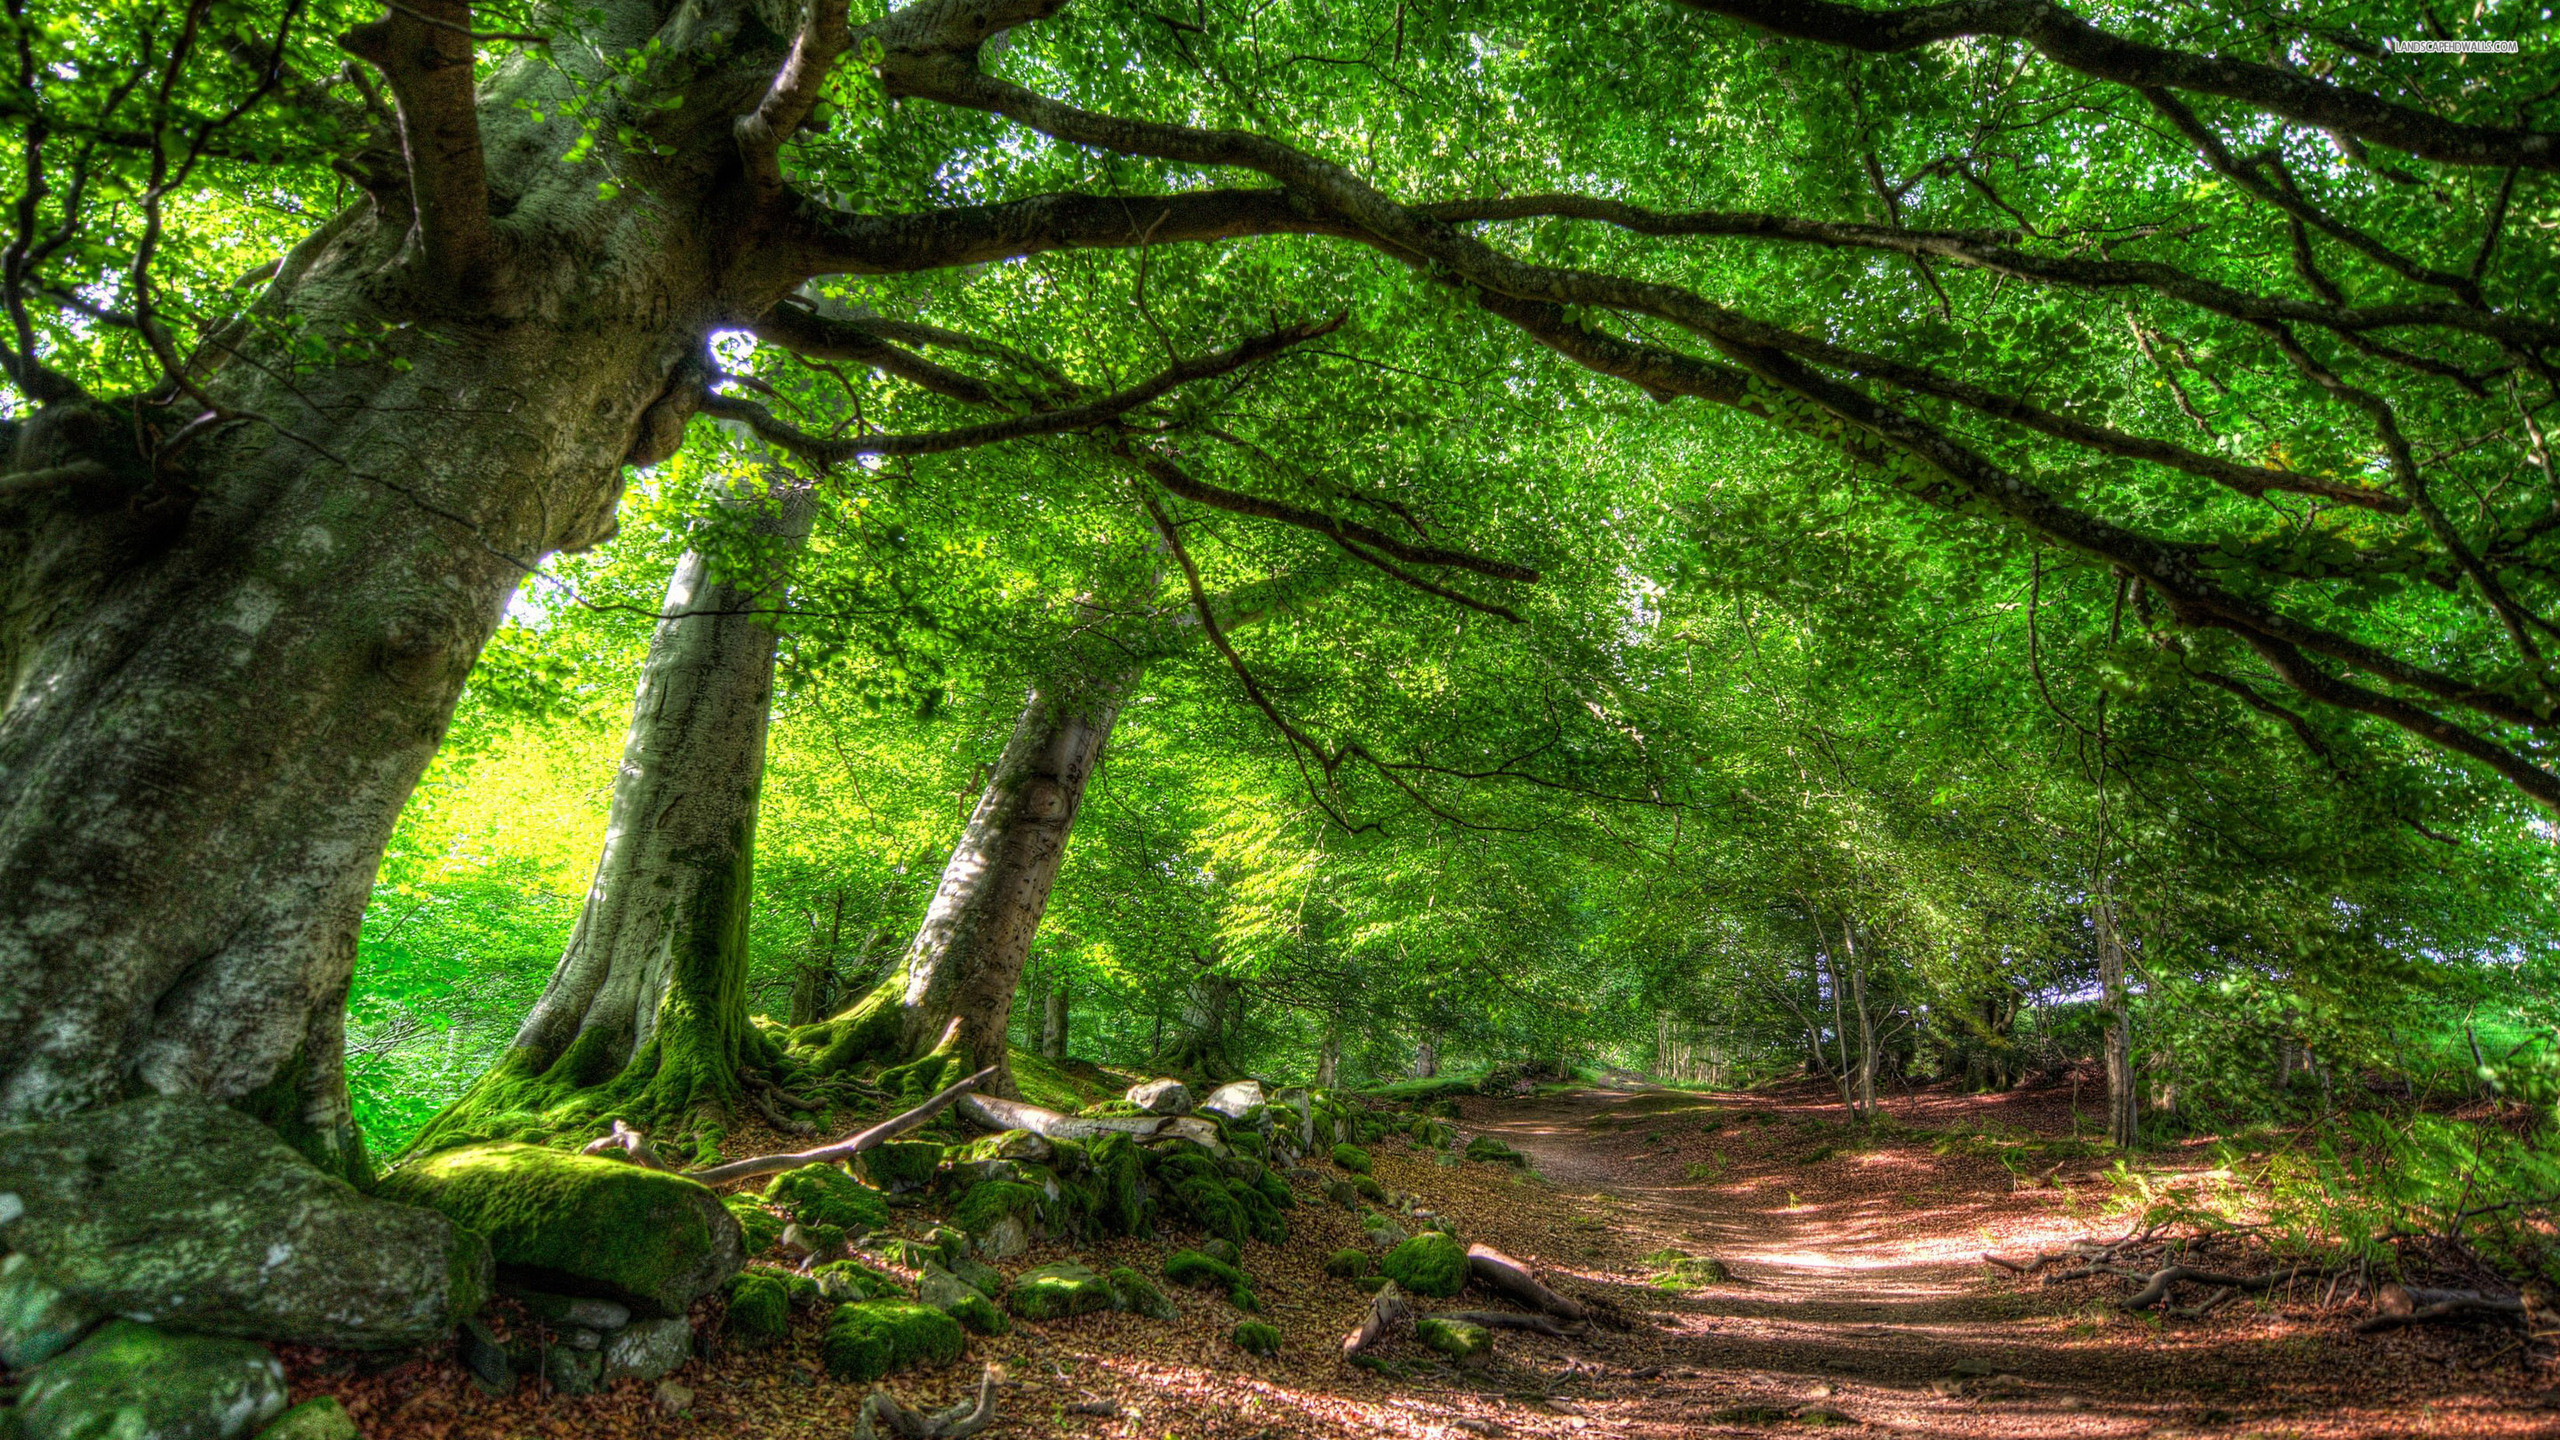 green forest wallpaper hd,tree,forest,natural landscape,nature,woodland